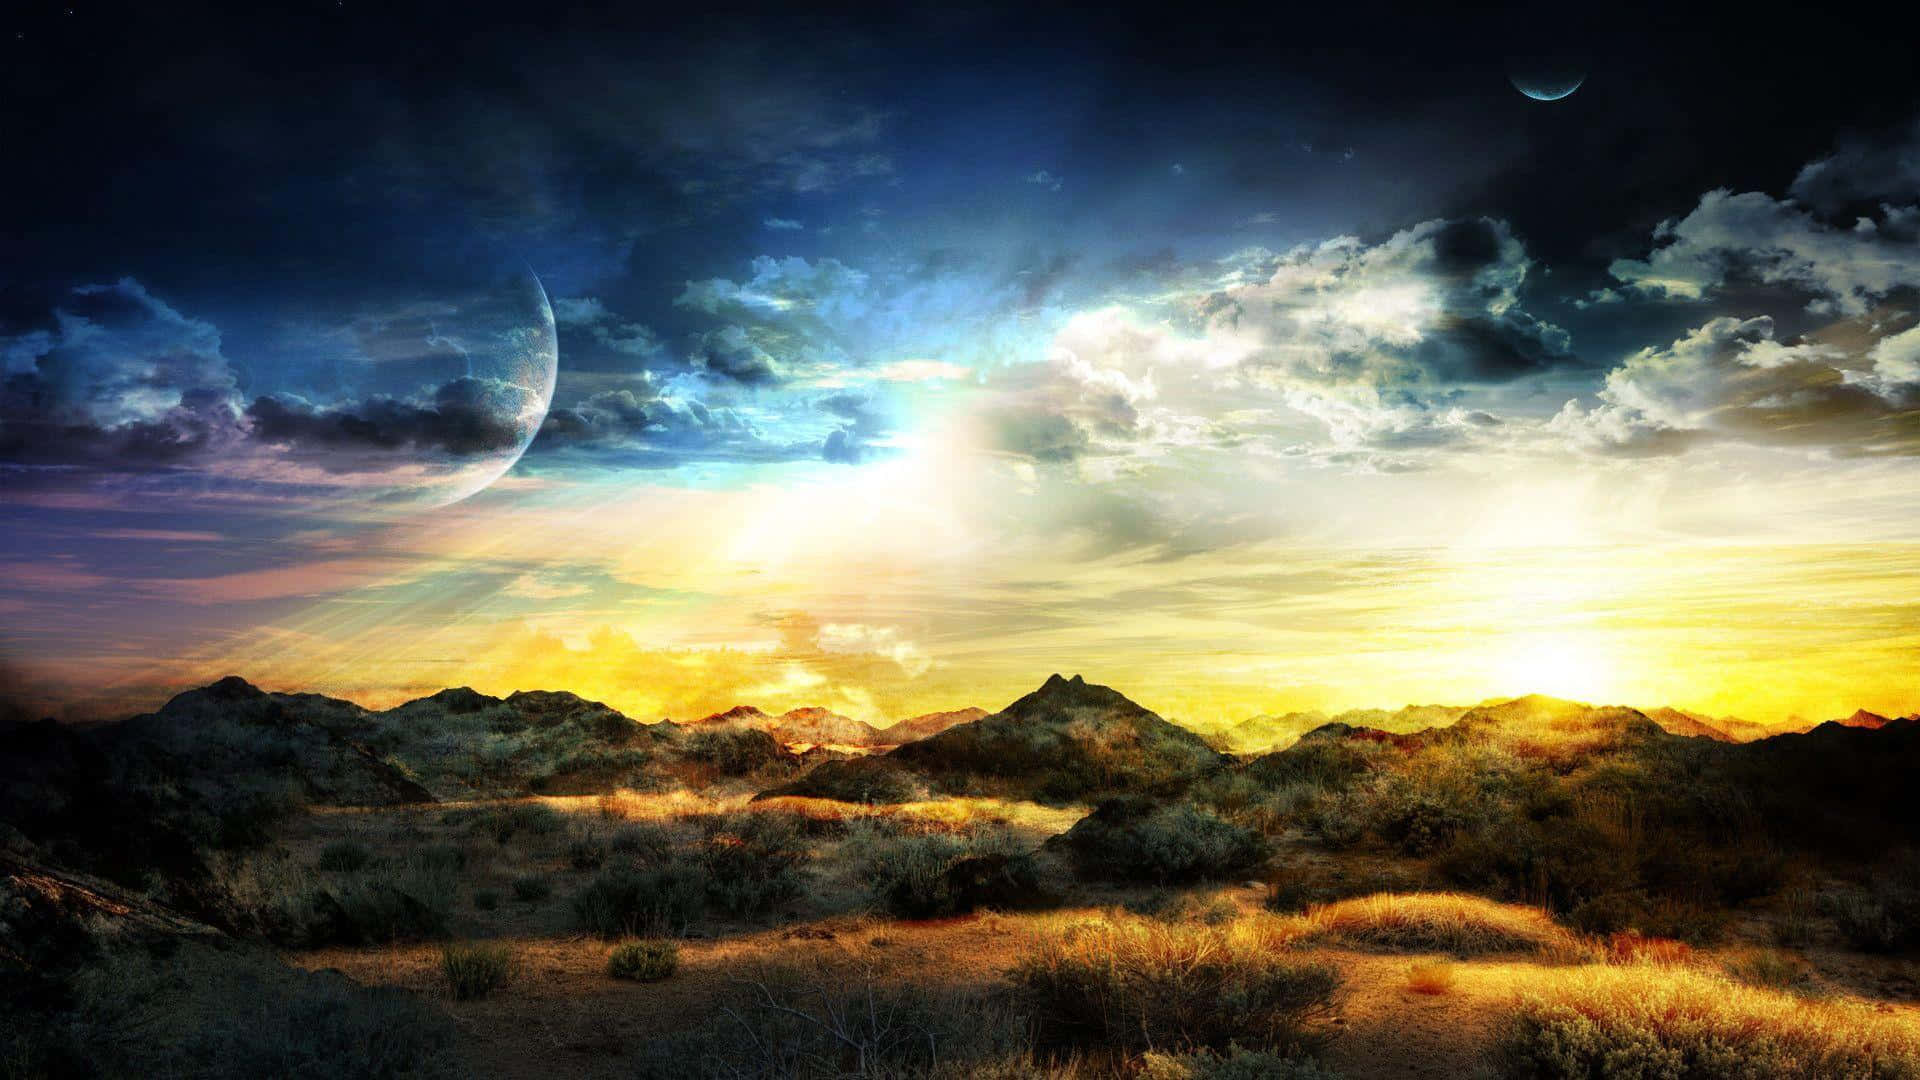 a desert landscape with a sun and moon Wallpaper